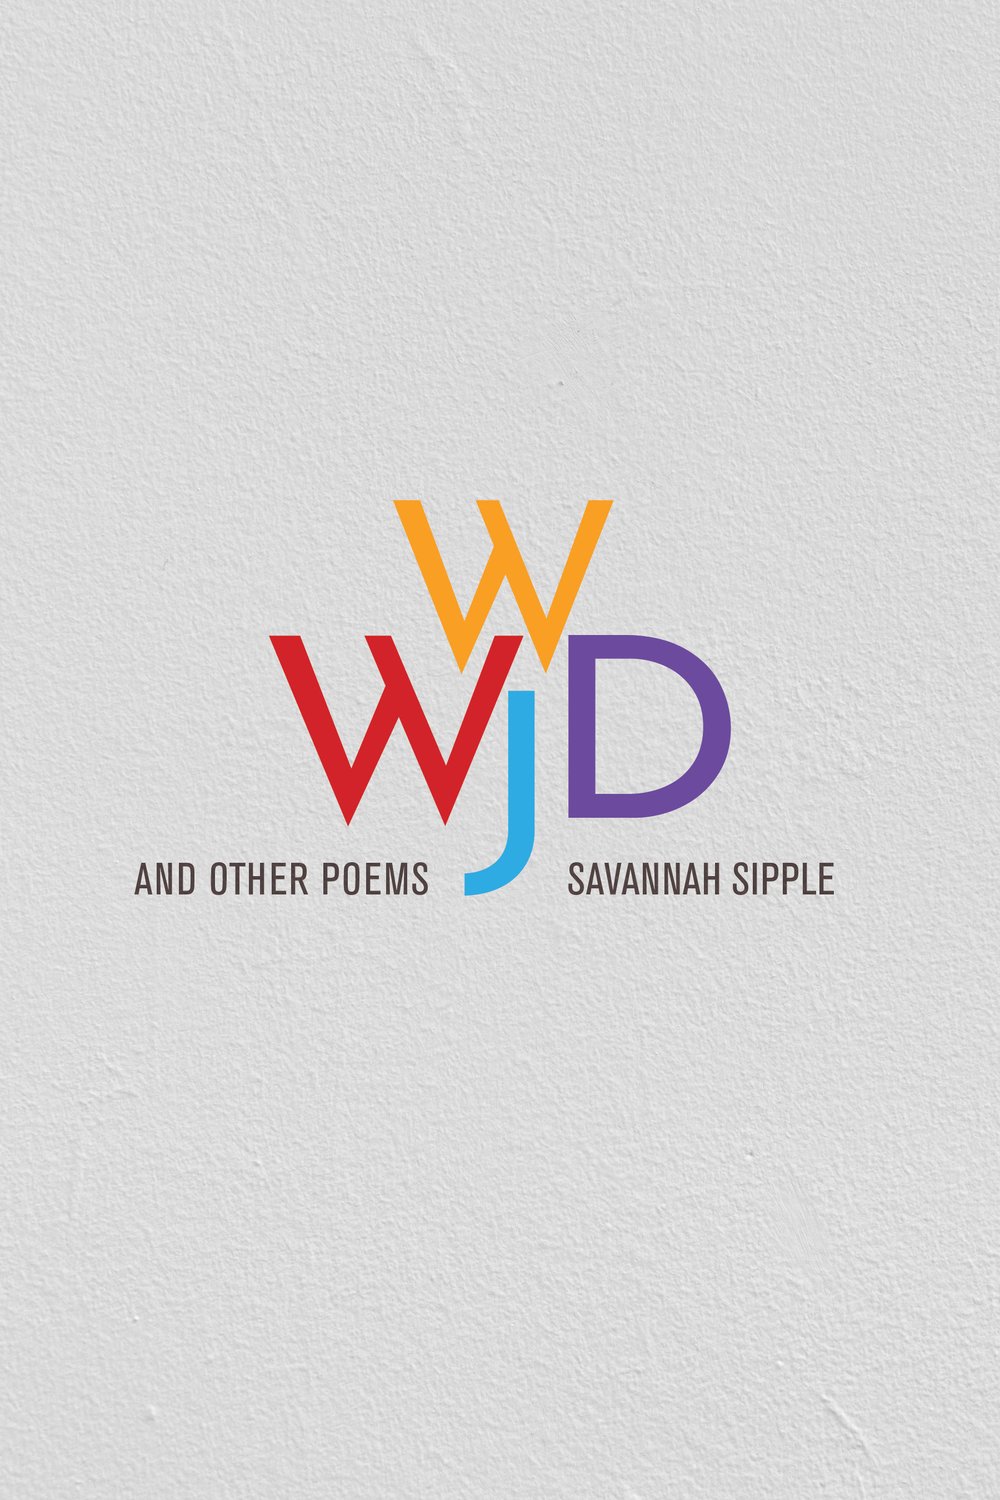 WWJD and Other Poems by Savannah Sipple